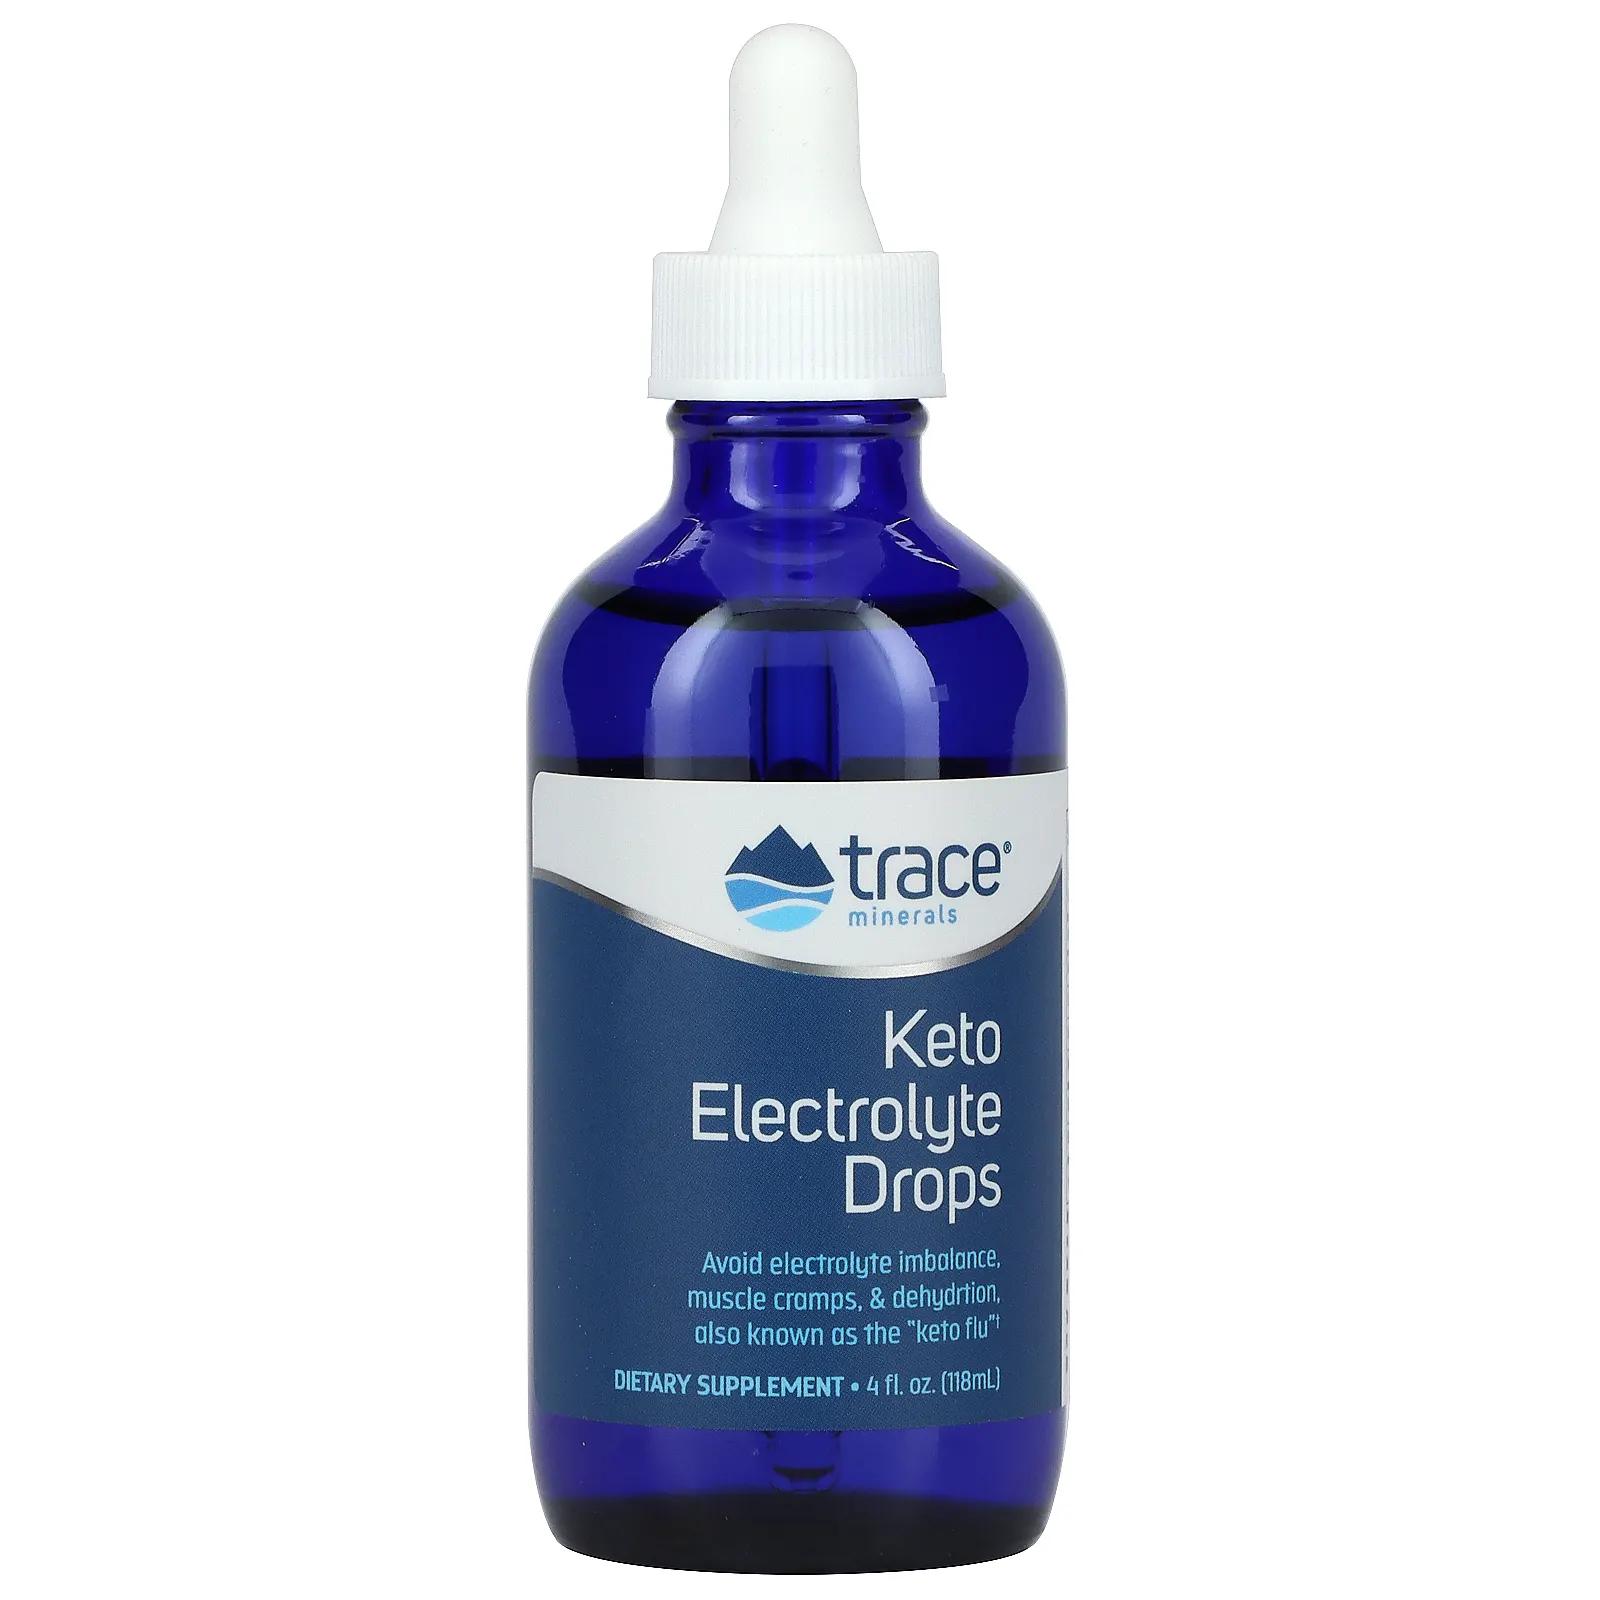 Trace Minerals Research Keto Electrolyte Drops 4 oz (118 ml) trace minerals research капли исследовательской концентрации trace minerals 118 мл